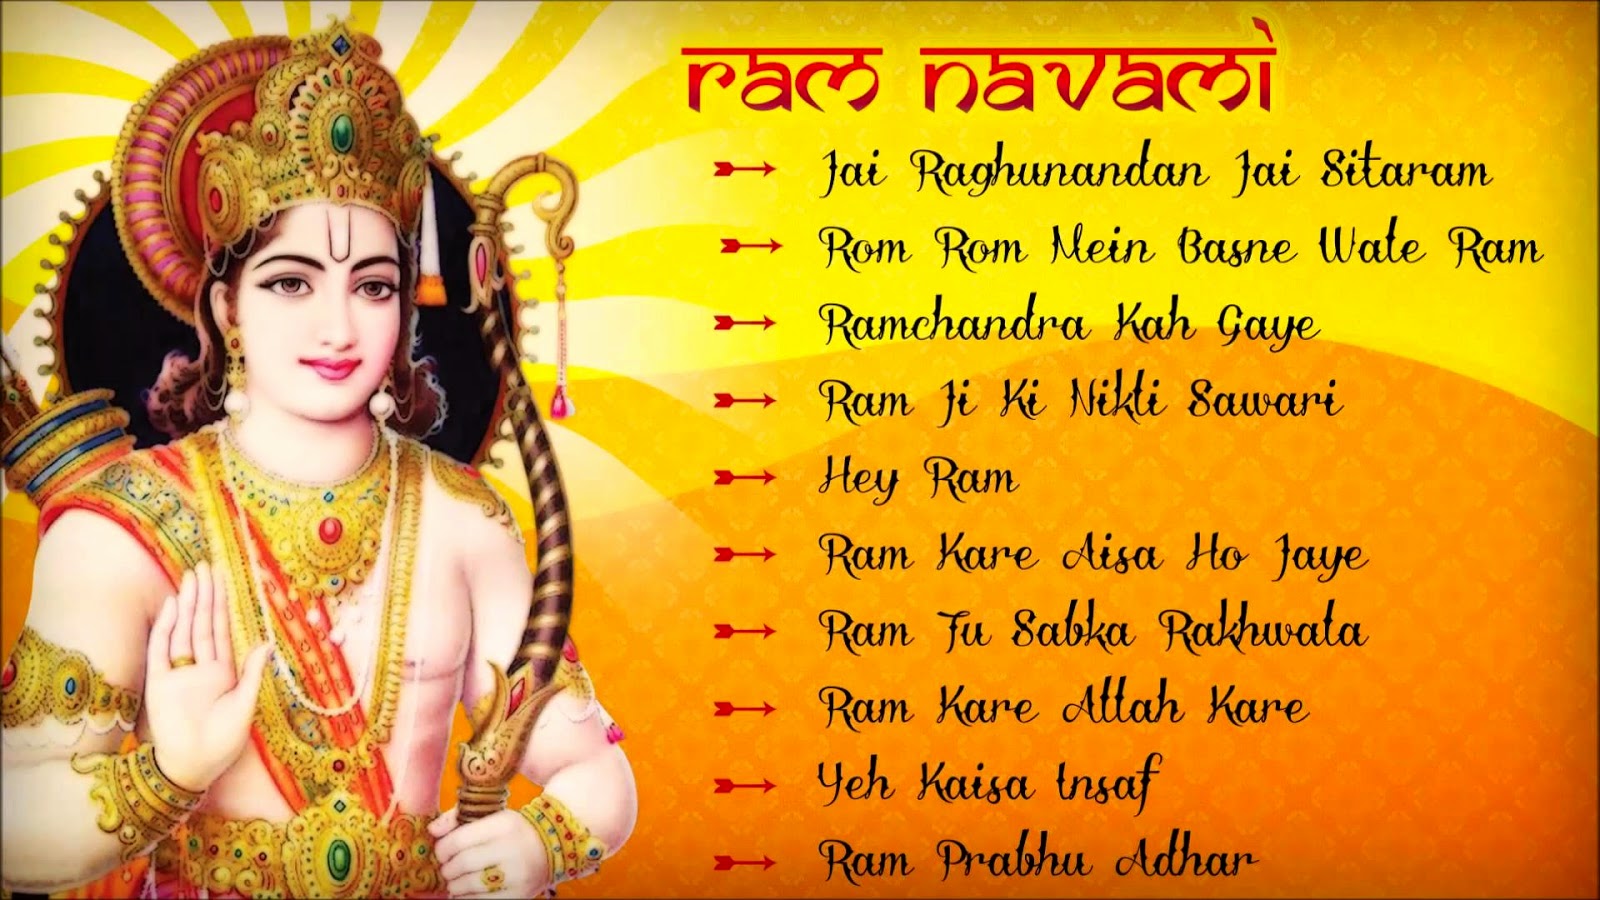 Happy Sri Rama Navami 2017 SMS Images Wallpapers Status Wishes| Lord Rama  3D Pics Photos Free Download